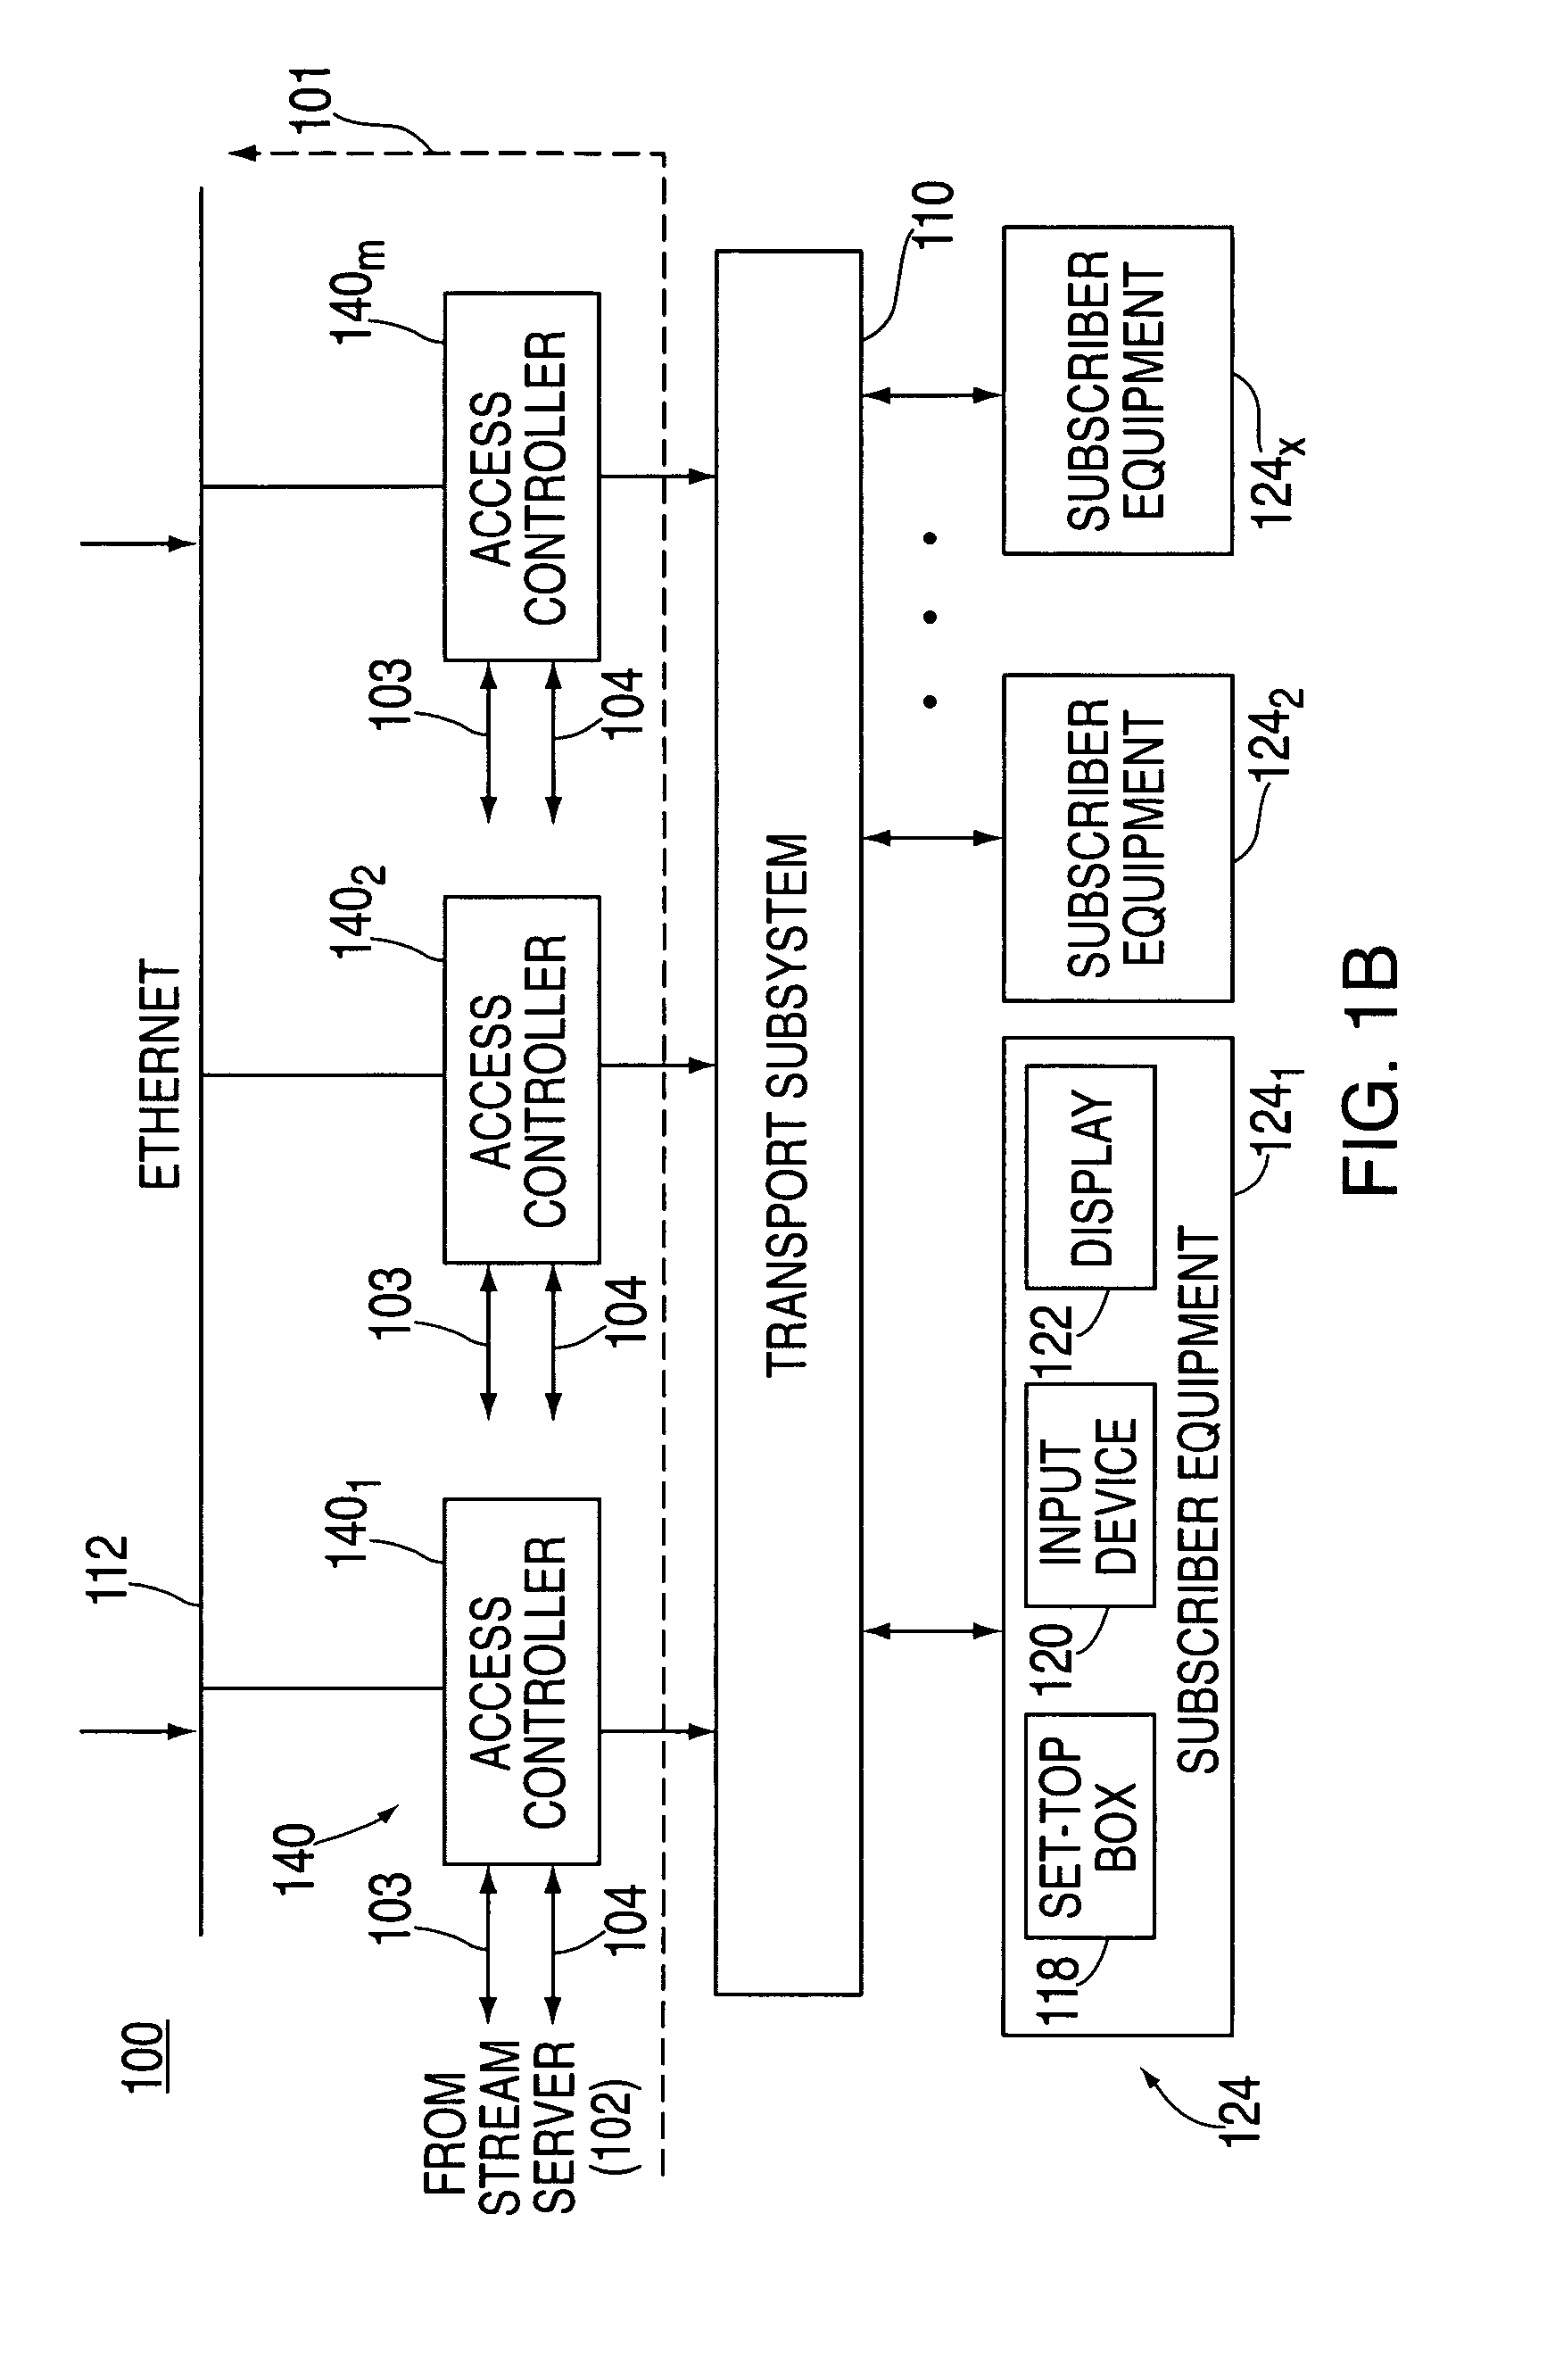 Method and apparatus of load sharing and improving fault tolerance in an interactive video distribution system